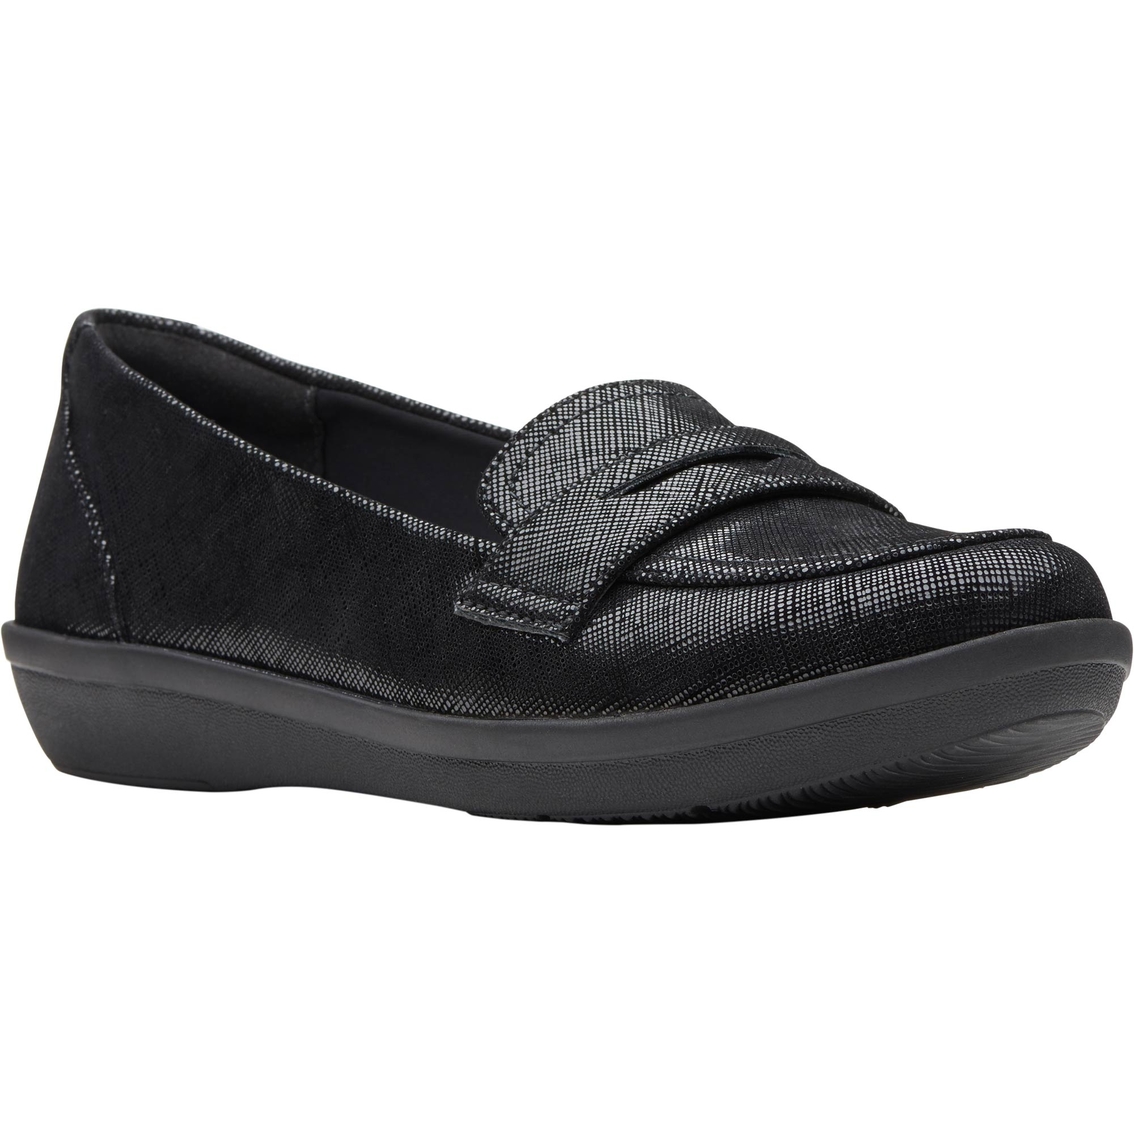 cloudsteppers loafers